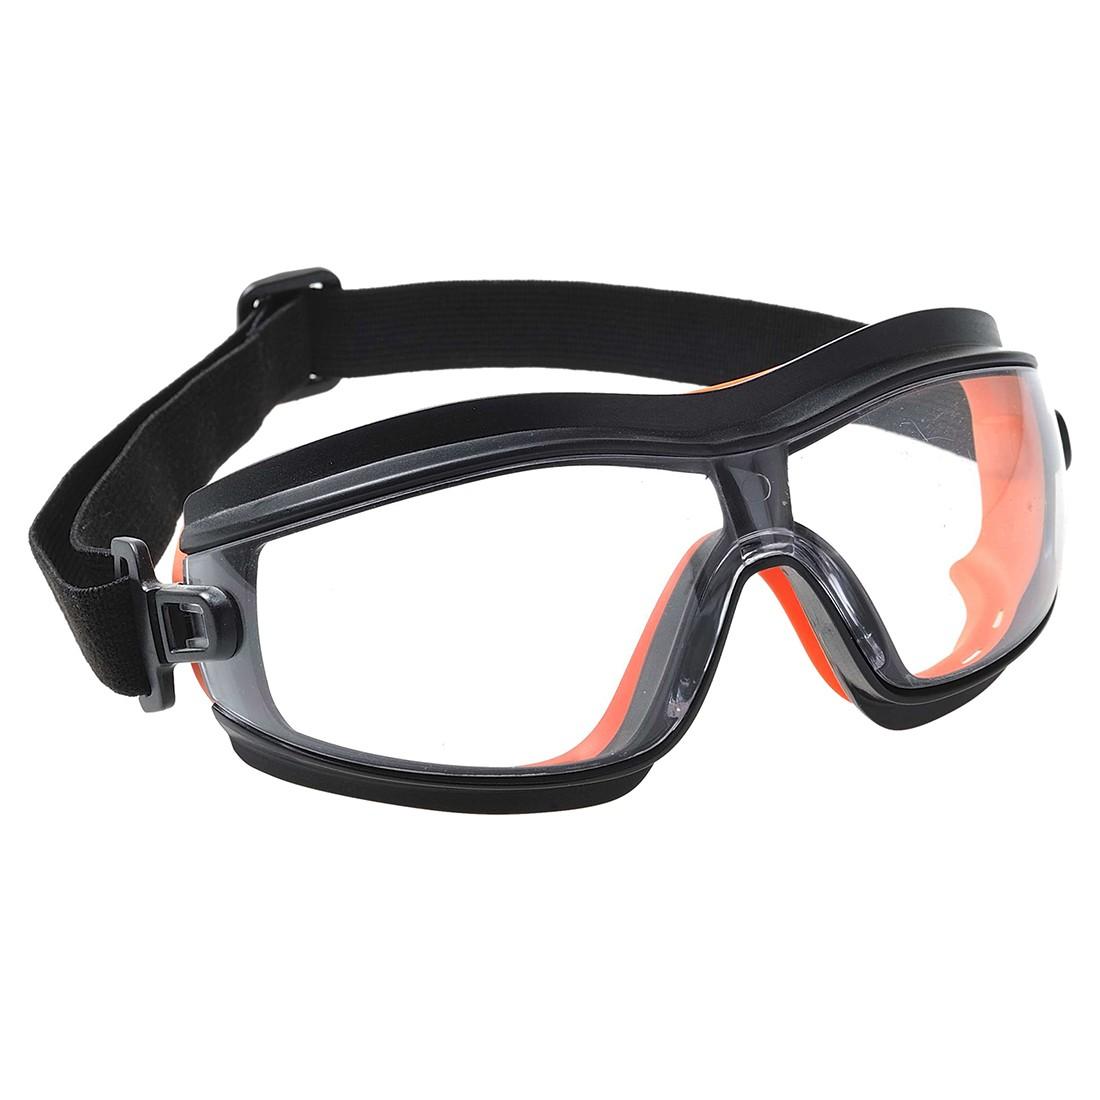 Portwest Pw26 Slim Safety Goggle Safetyware Sdn Bhd